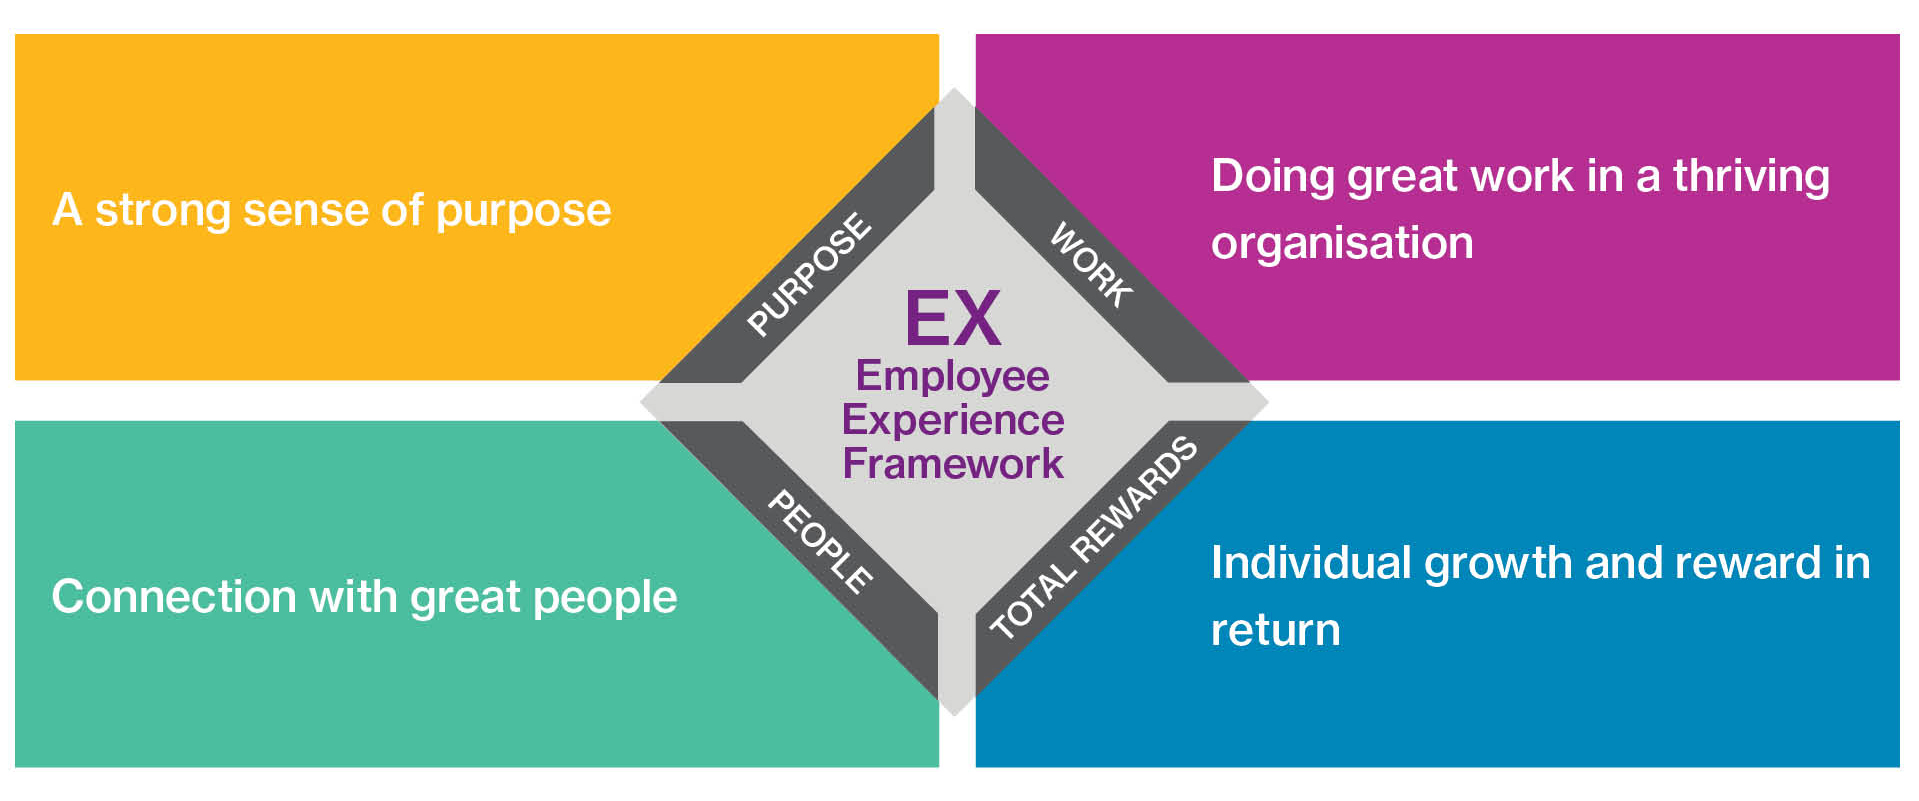 Four of the most important areas that make up the employee experience: Purpose, Work, People, and Total Rewards